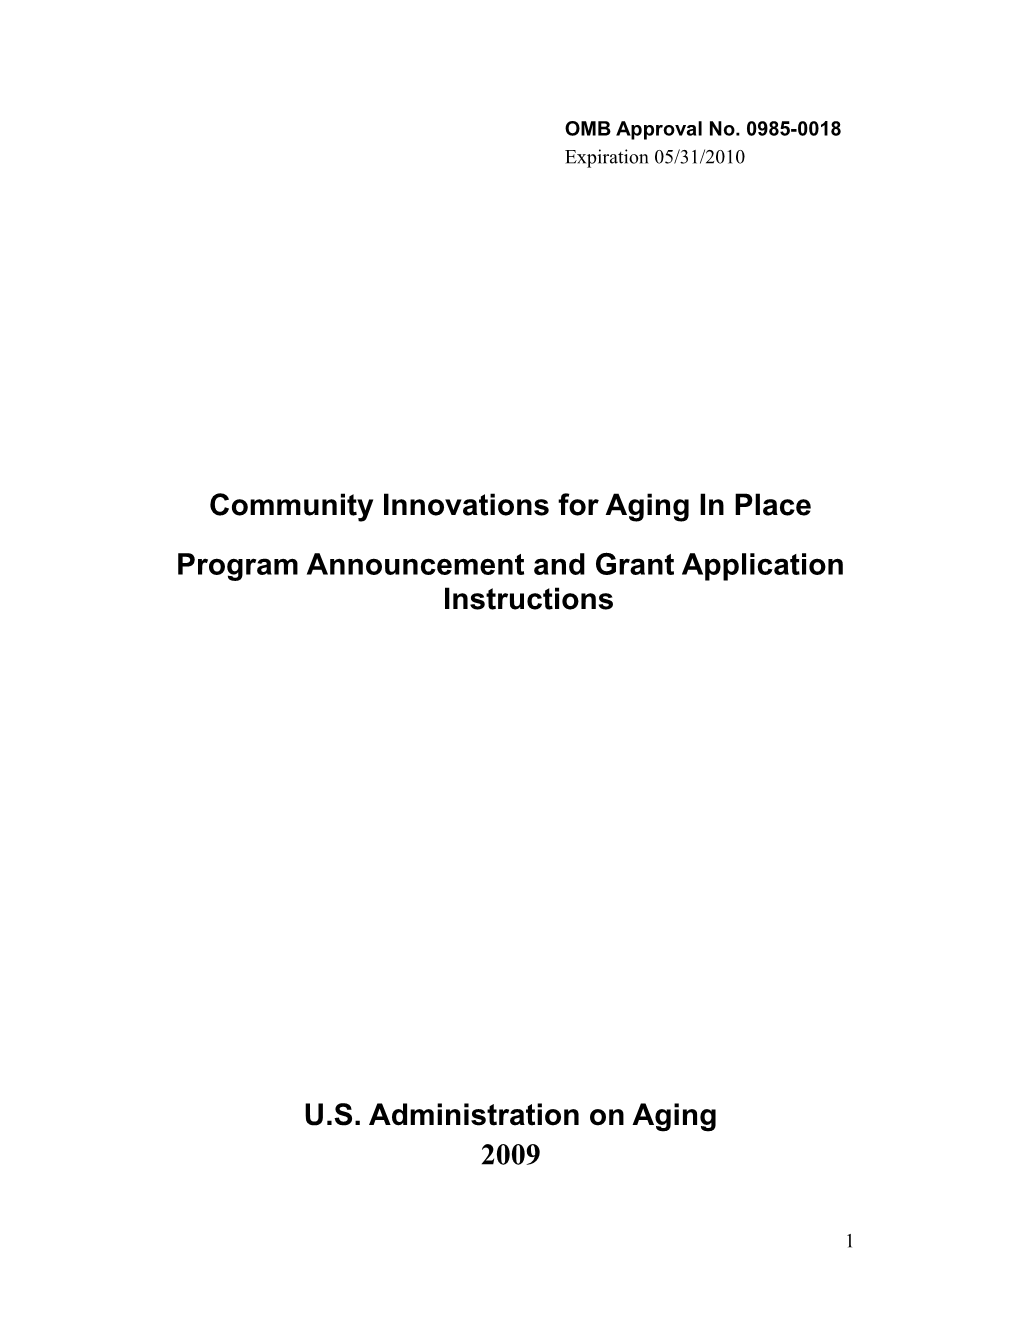 Community Innovations for Aging in Place